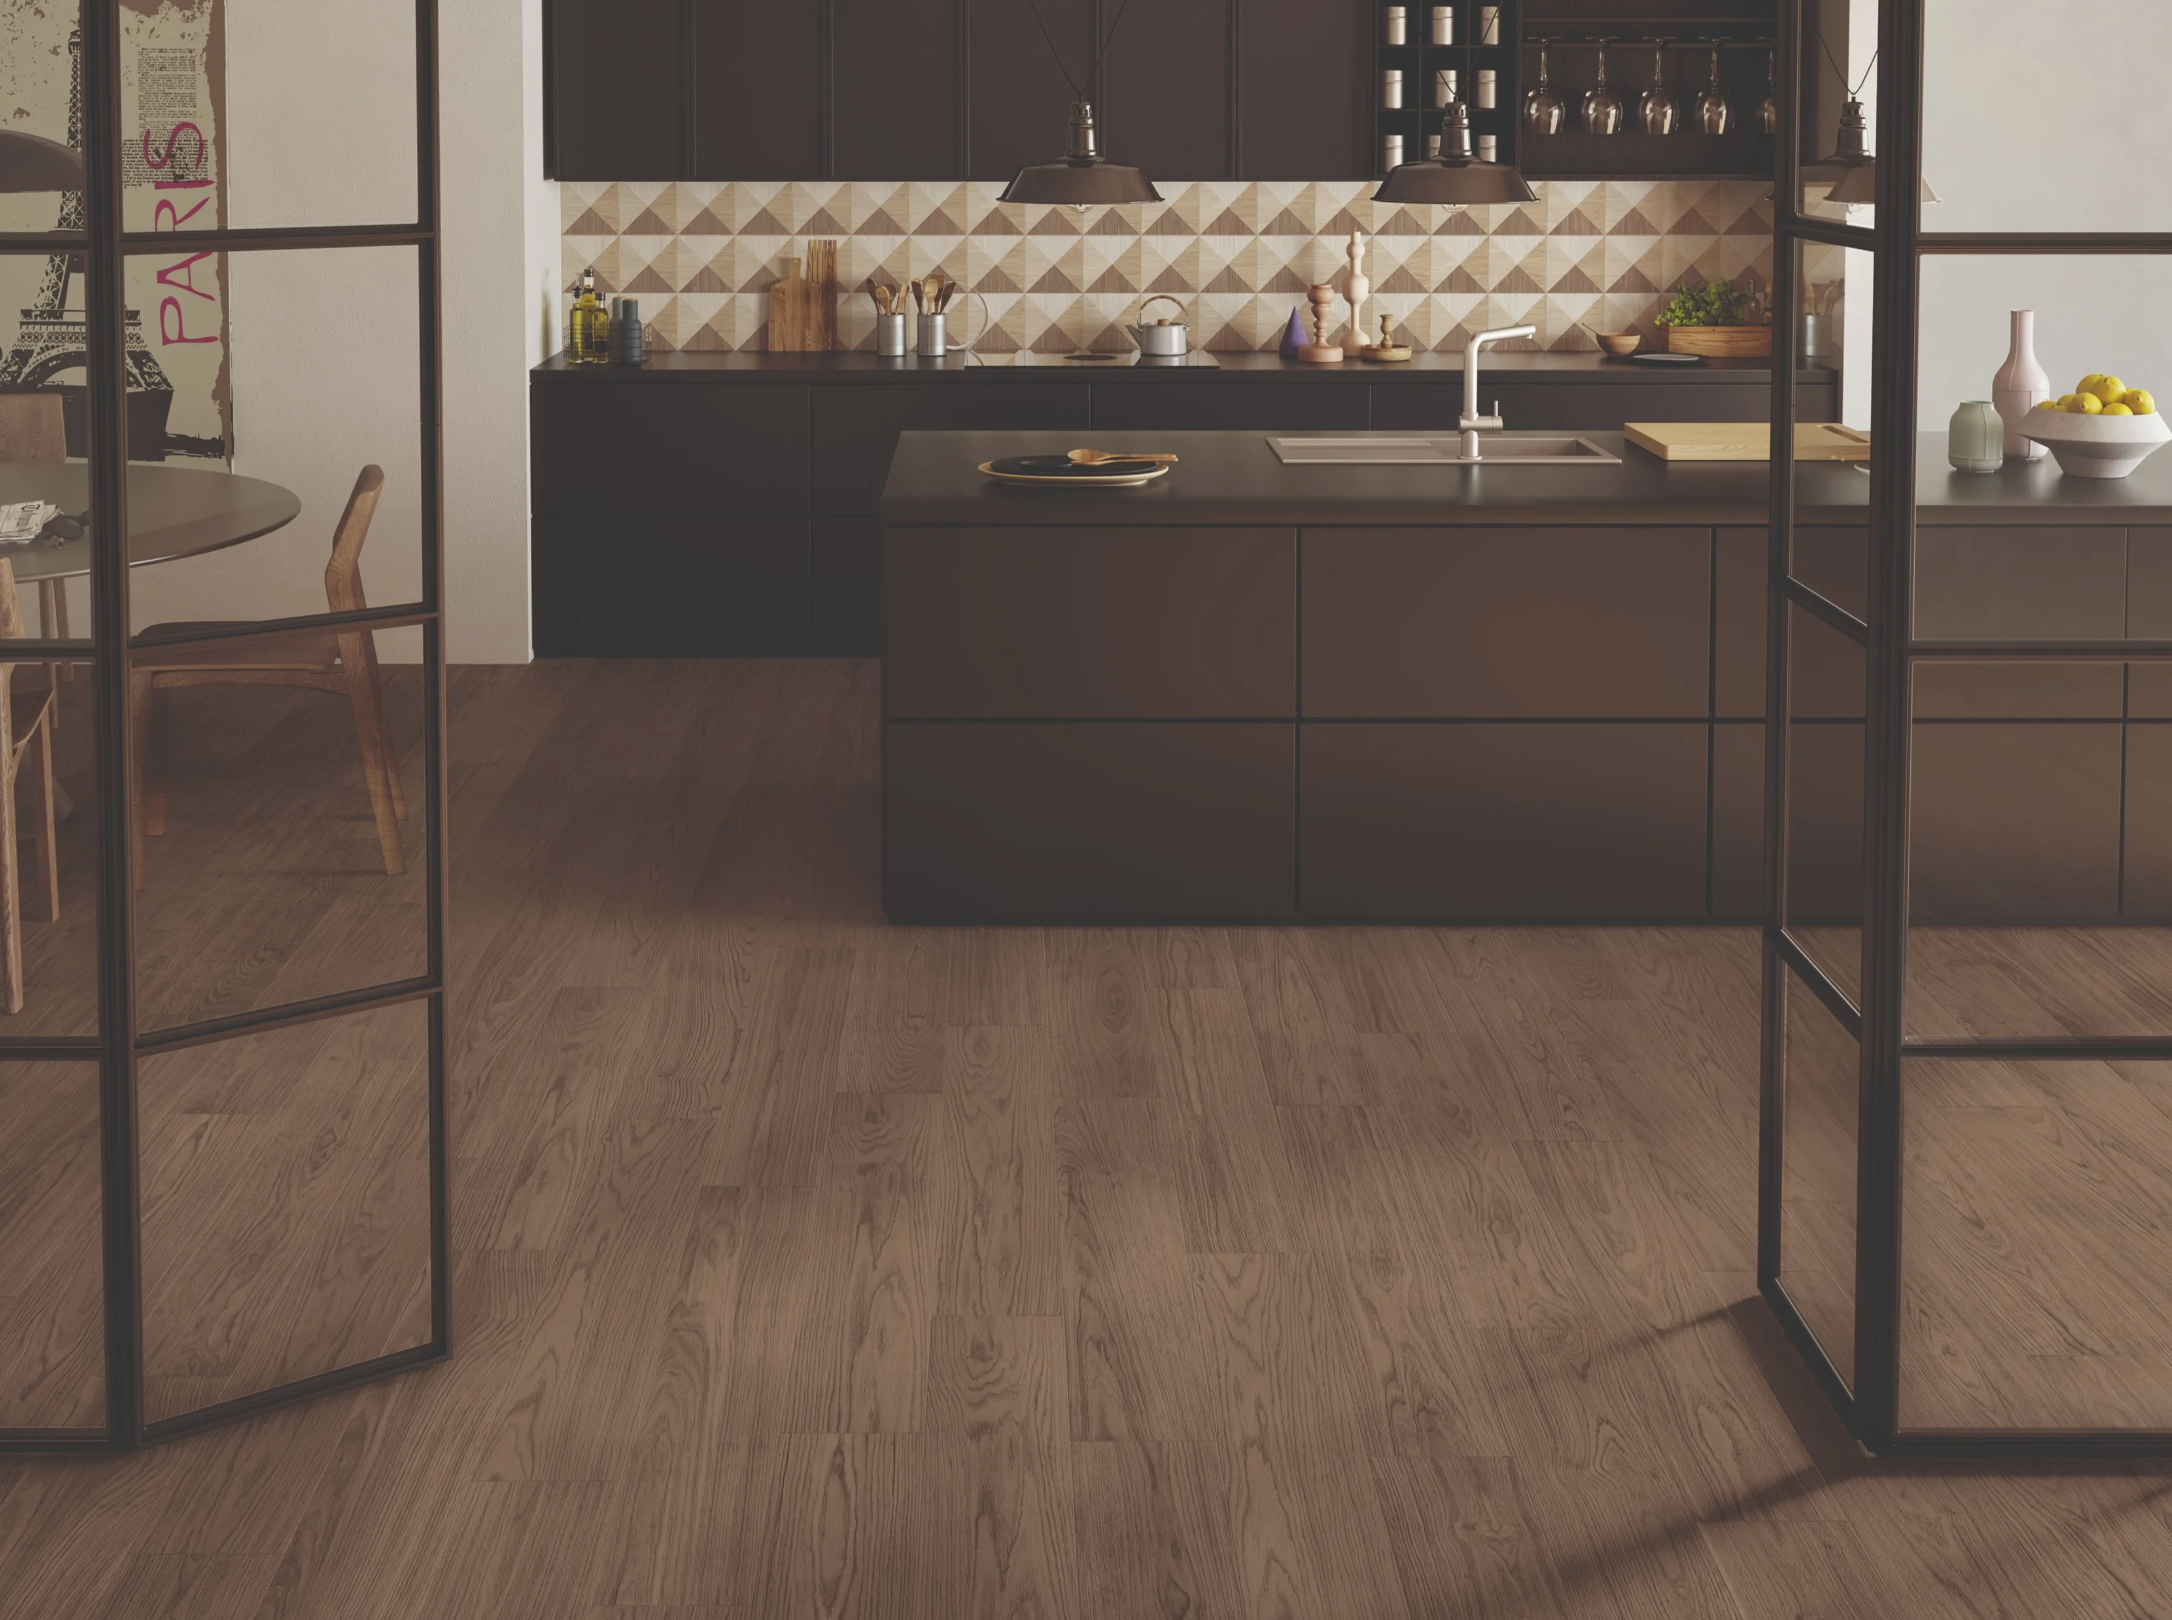 Tabacco Dimore R9 series porcelain tile floor by Emilceramica Group 20x120 1st Choice
